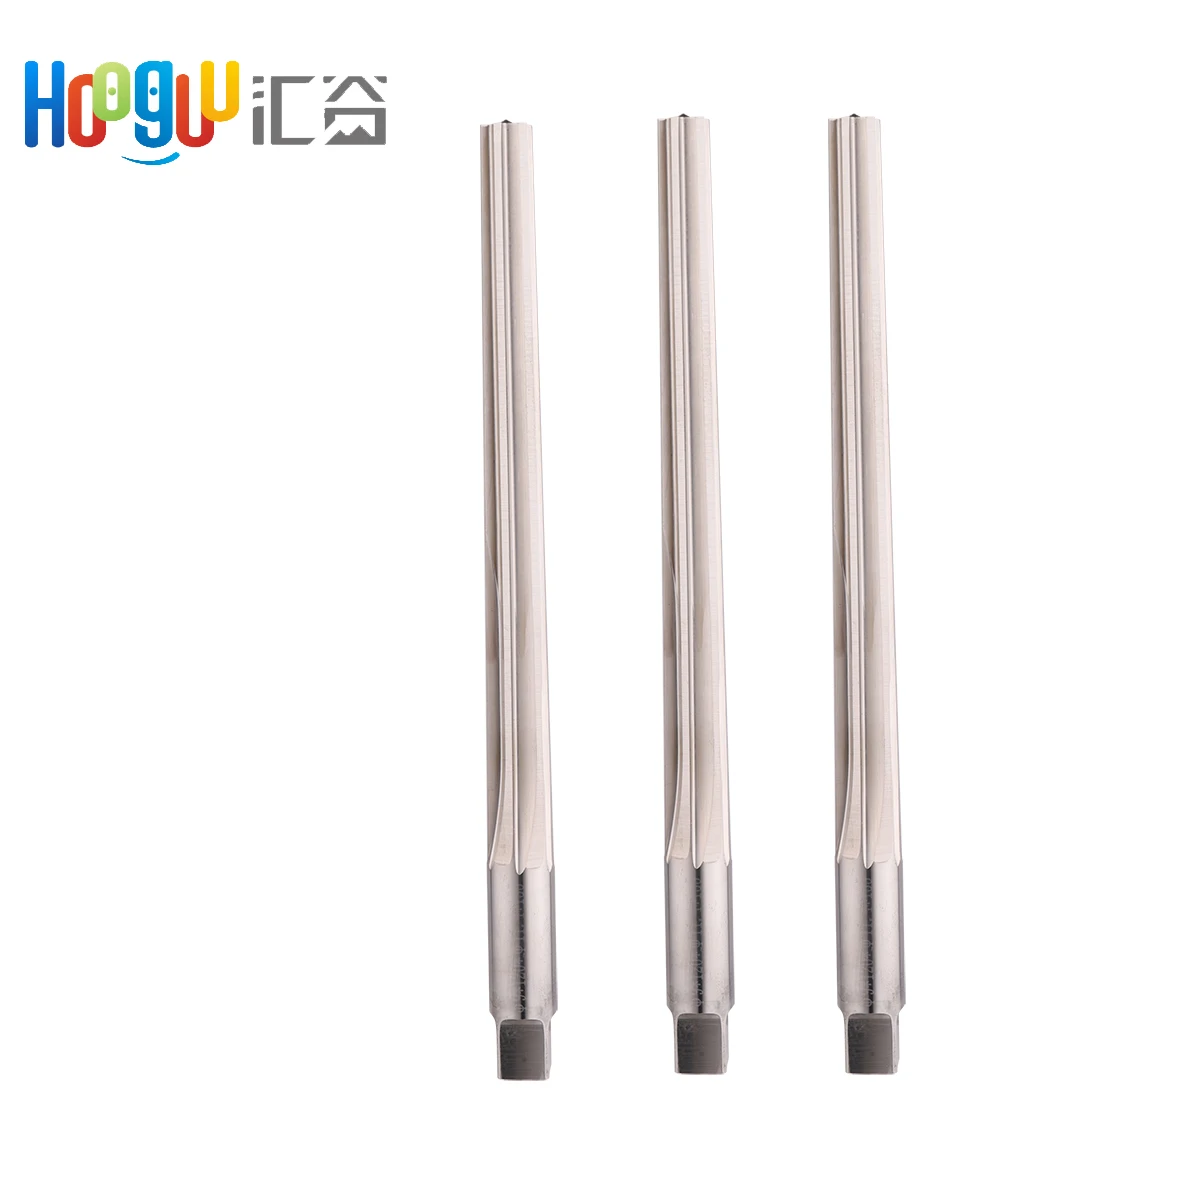 New HSS Straight Flute Taper Pin Reamer Select From 3mm to 16mm